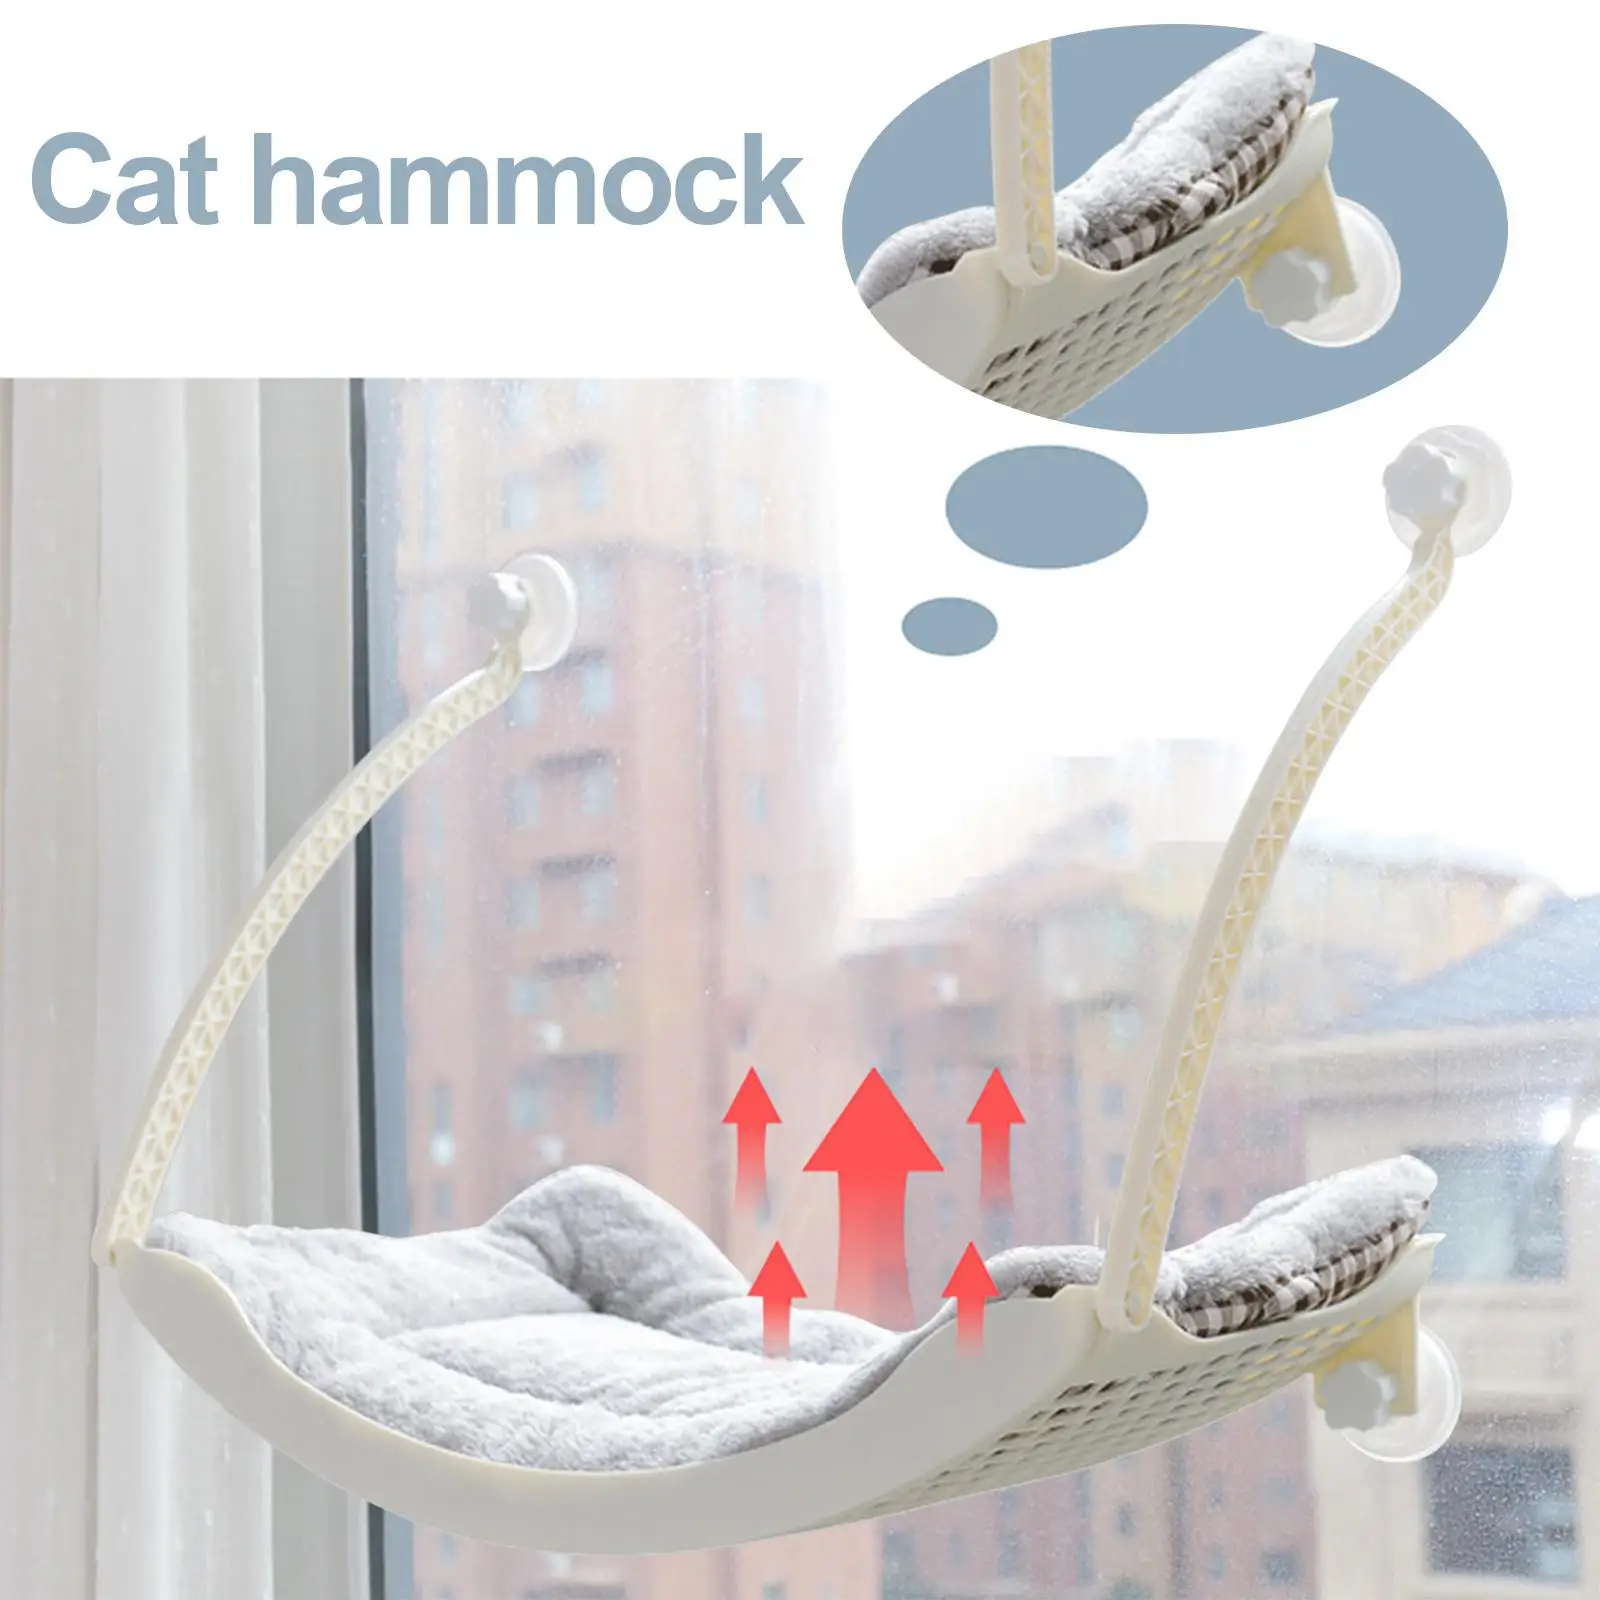 Pet Bed Suction Cup Safety Hanging Seat Perches Cat Window Hammock Shelf for Sun Bathing Resting Basking Indoor